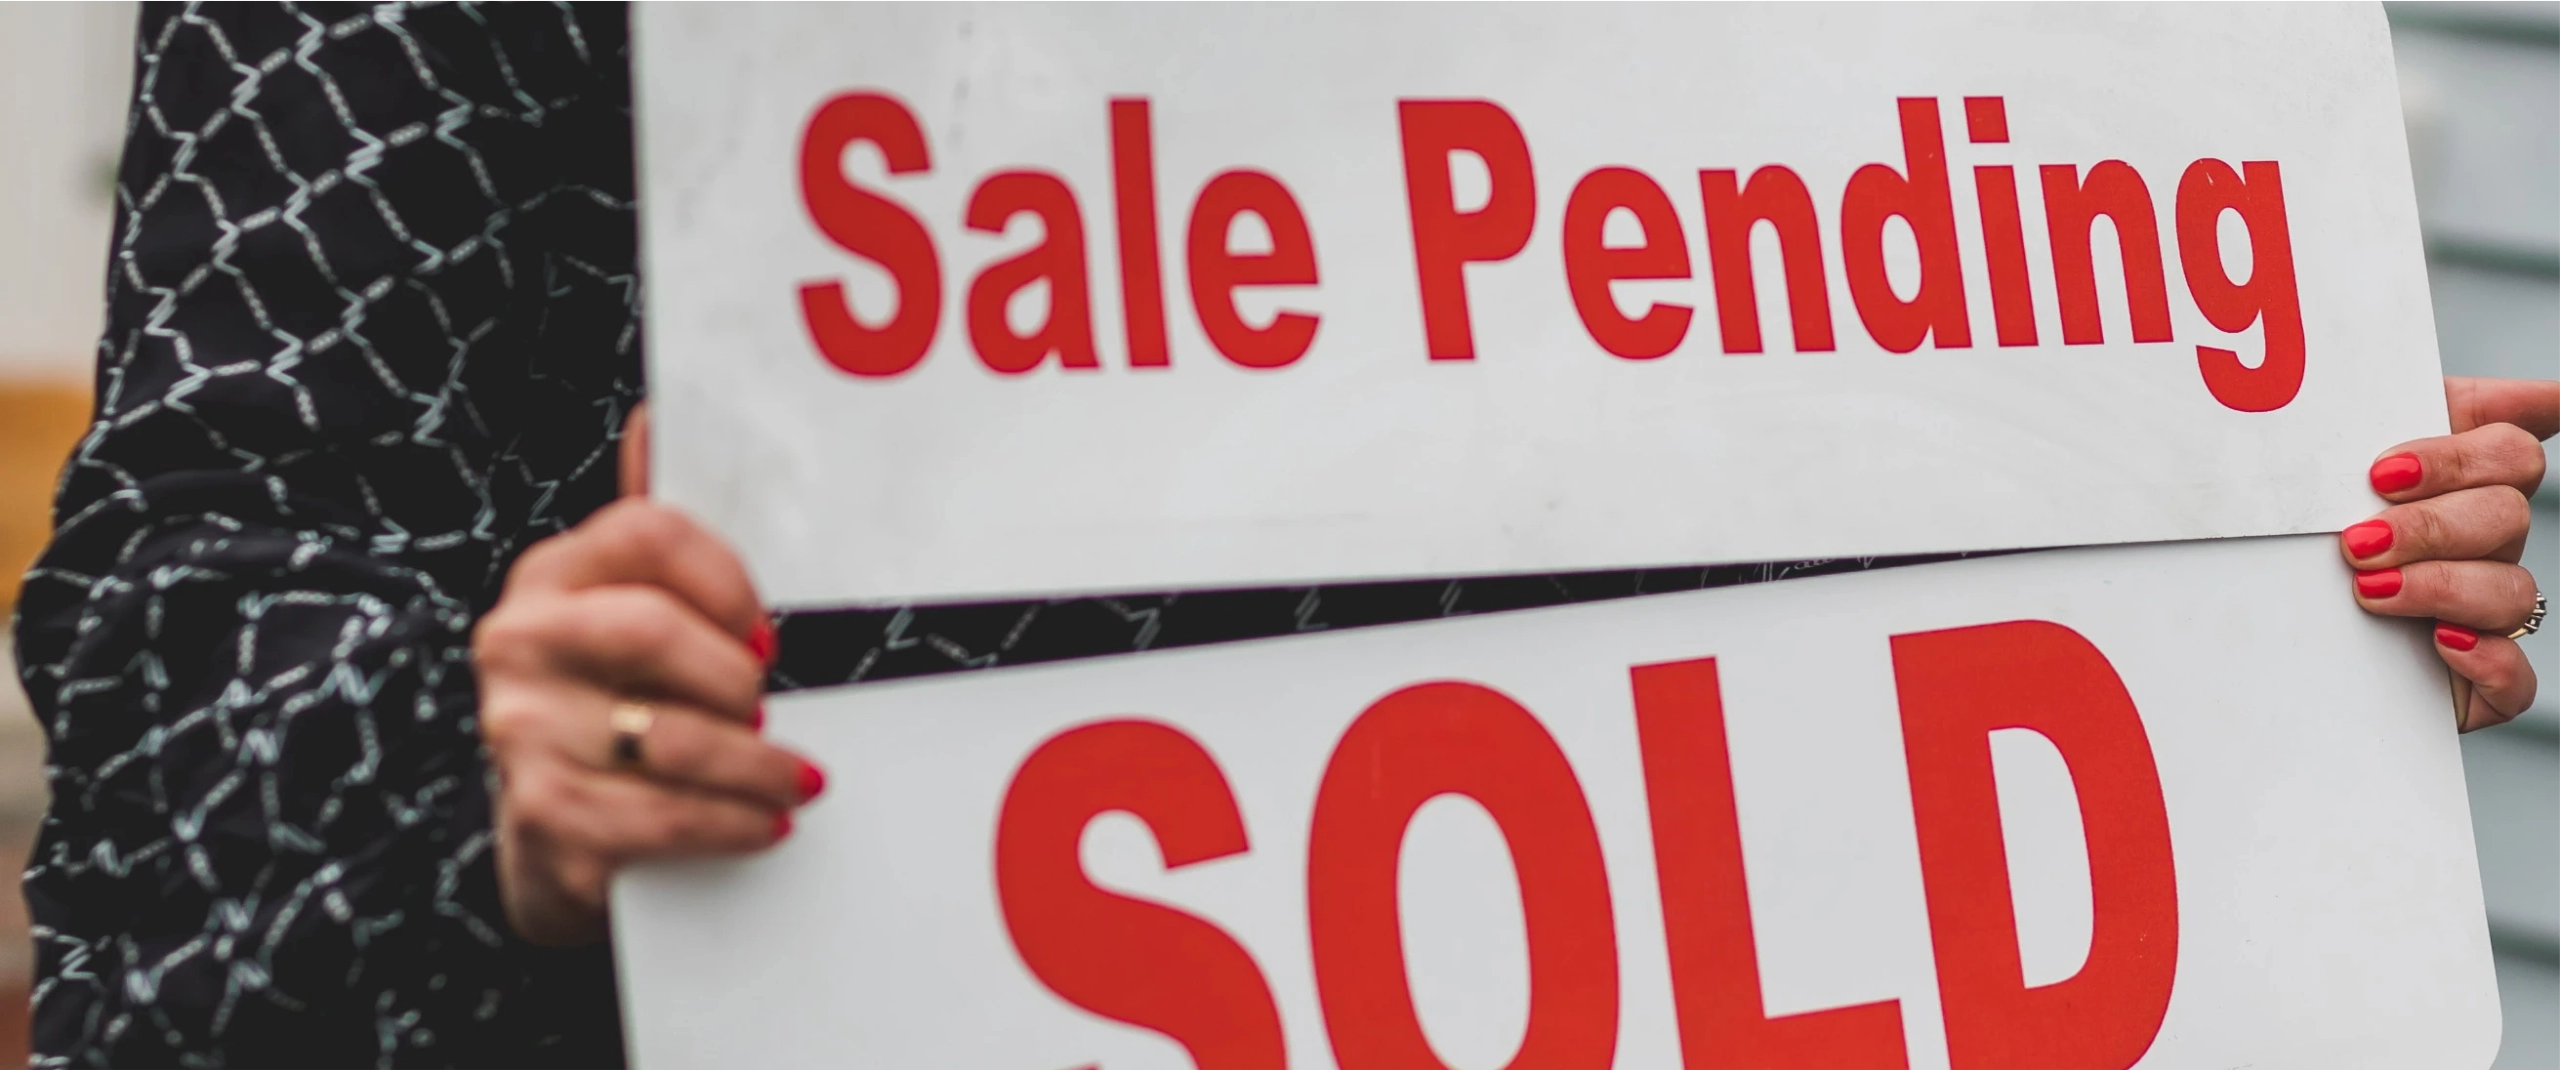 A dramatic close up of a woman holding "Sale pending, SOLD" signs